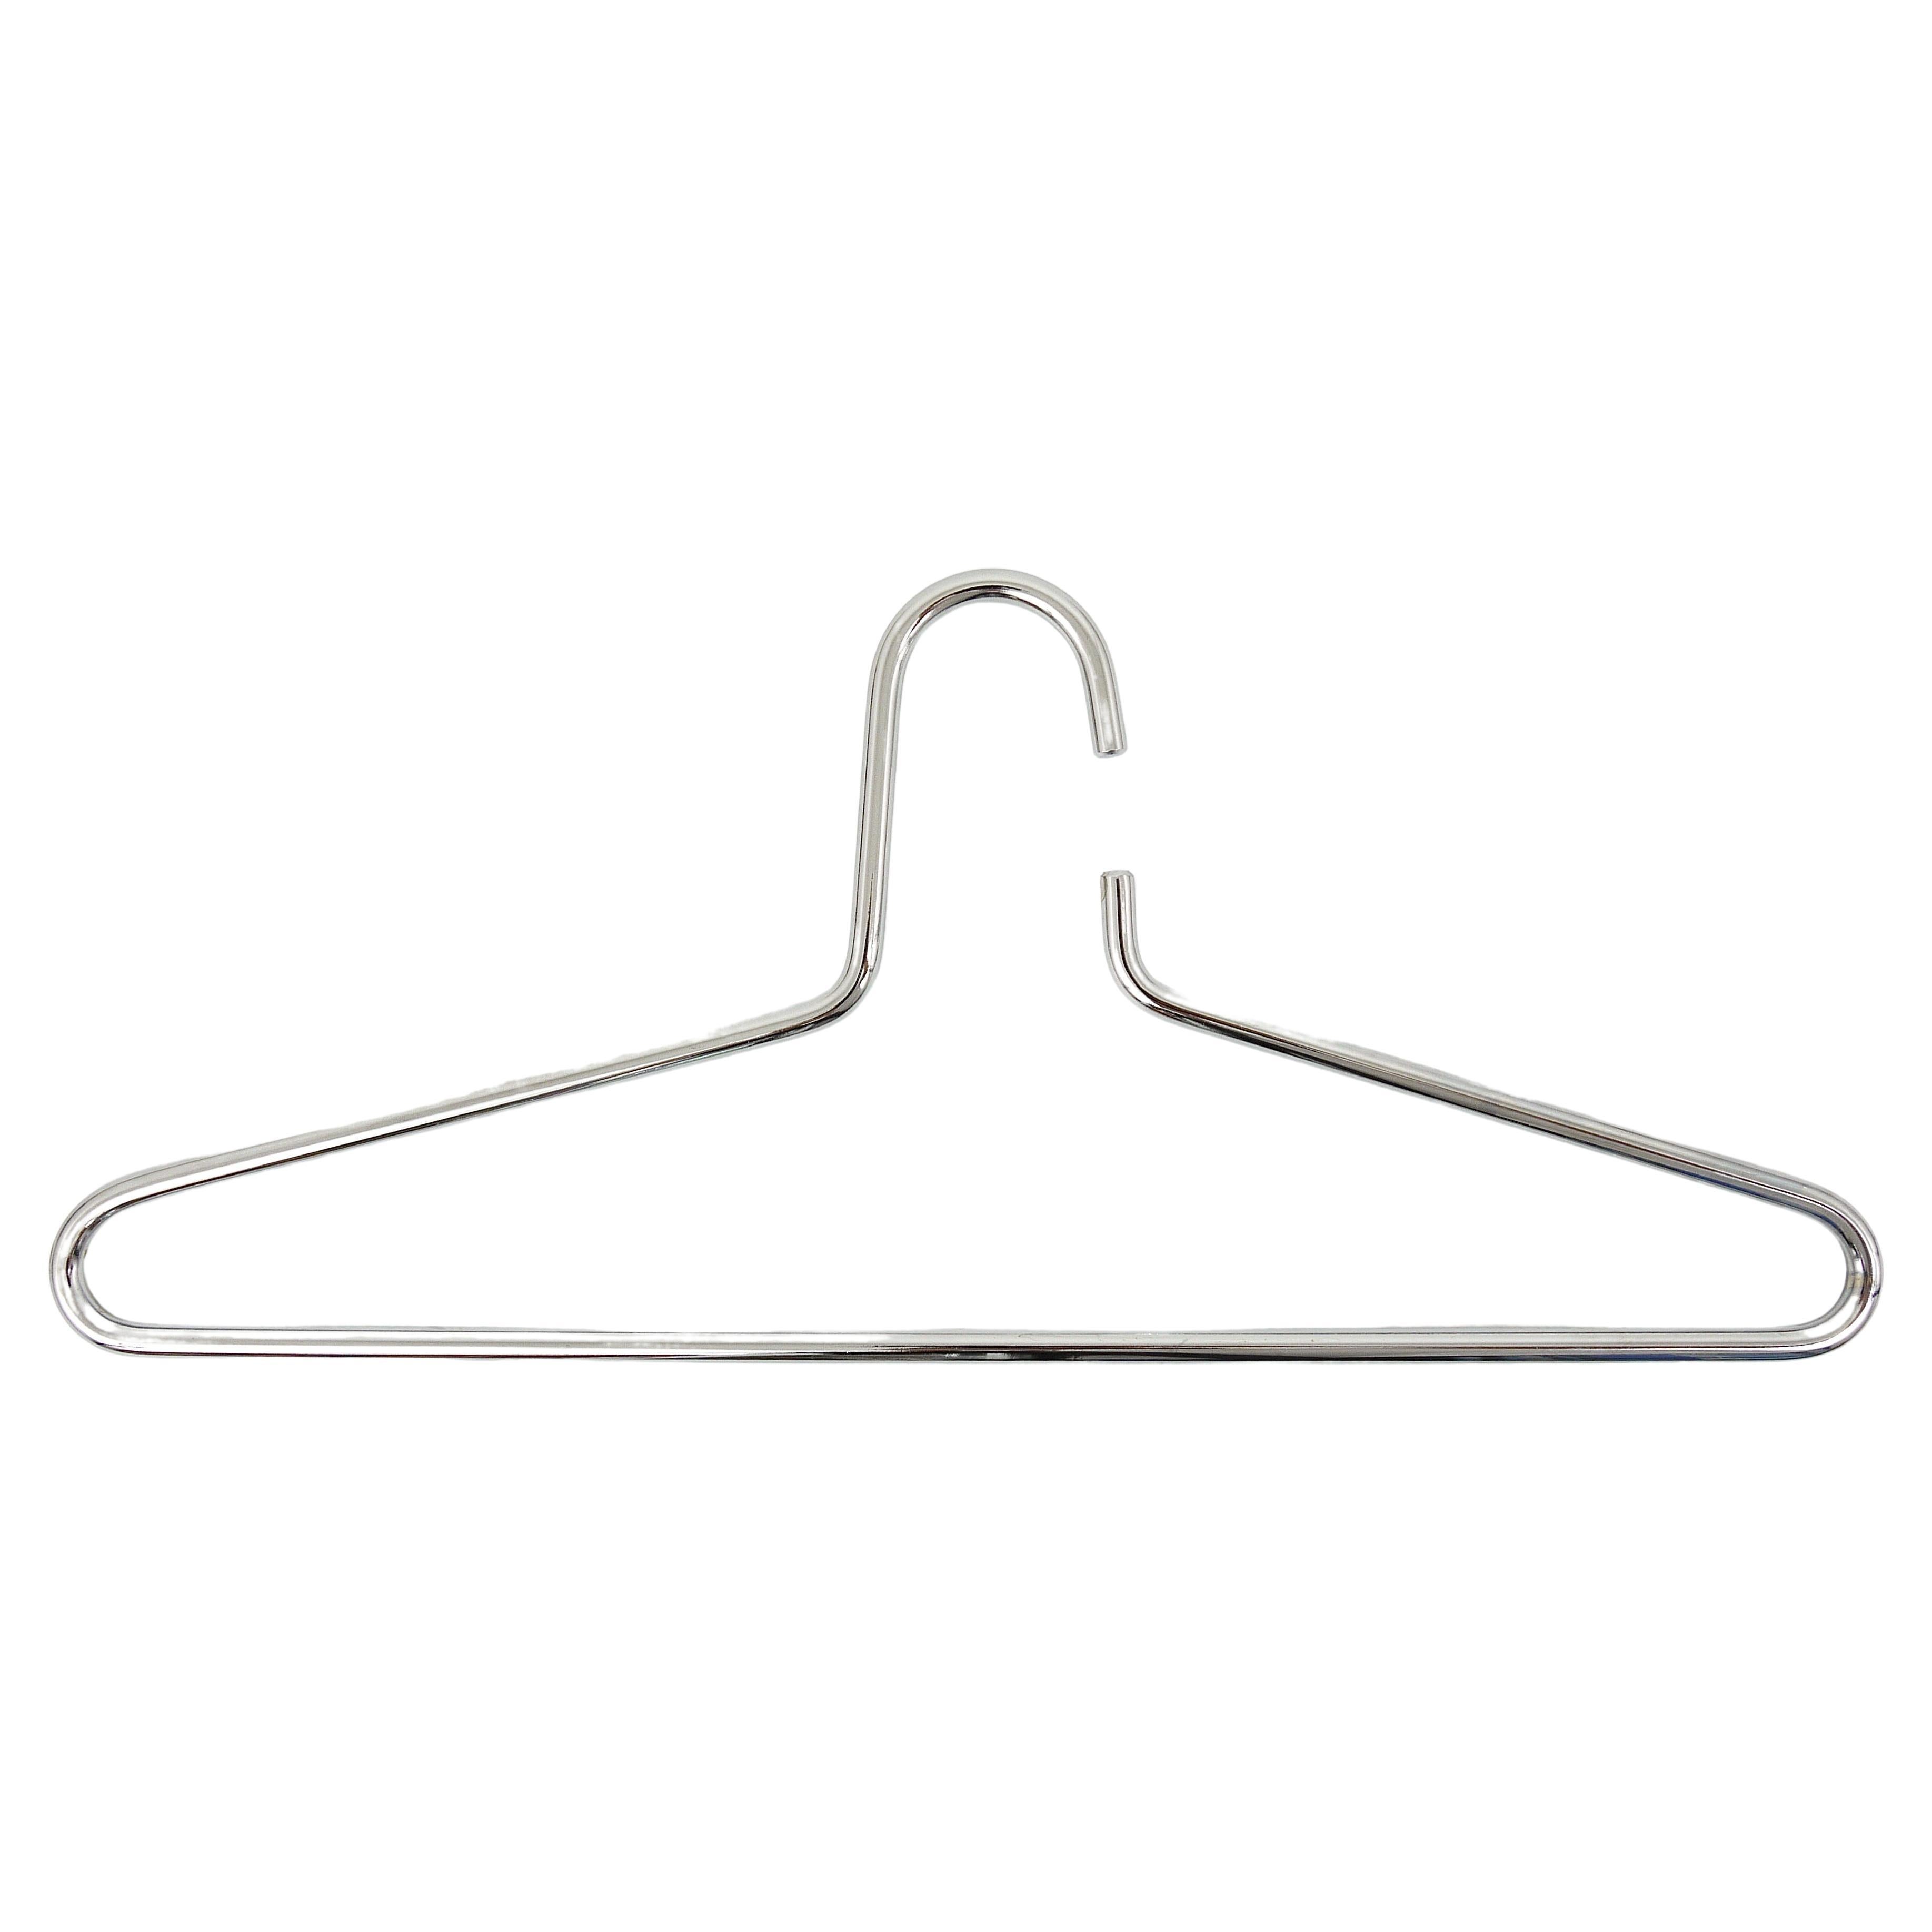 Up to 13 Austrian Modernist Solid Chrome-Plated Coat Hangers from the 1970s